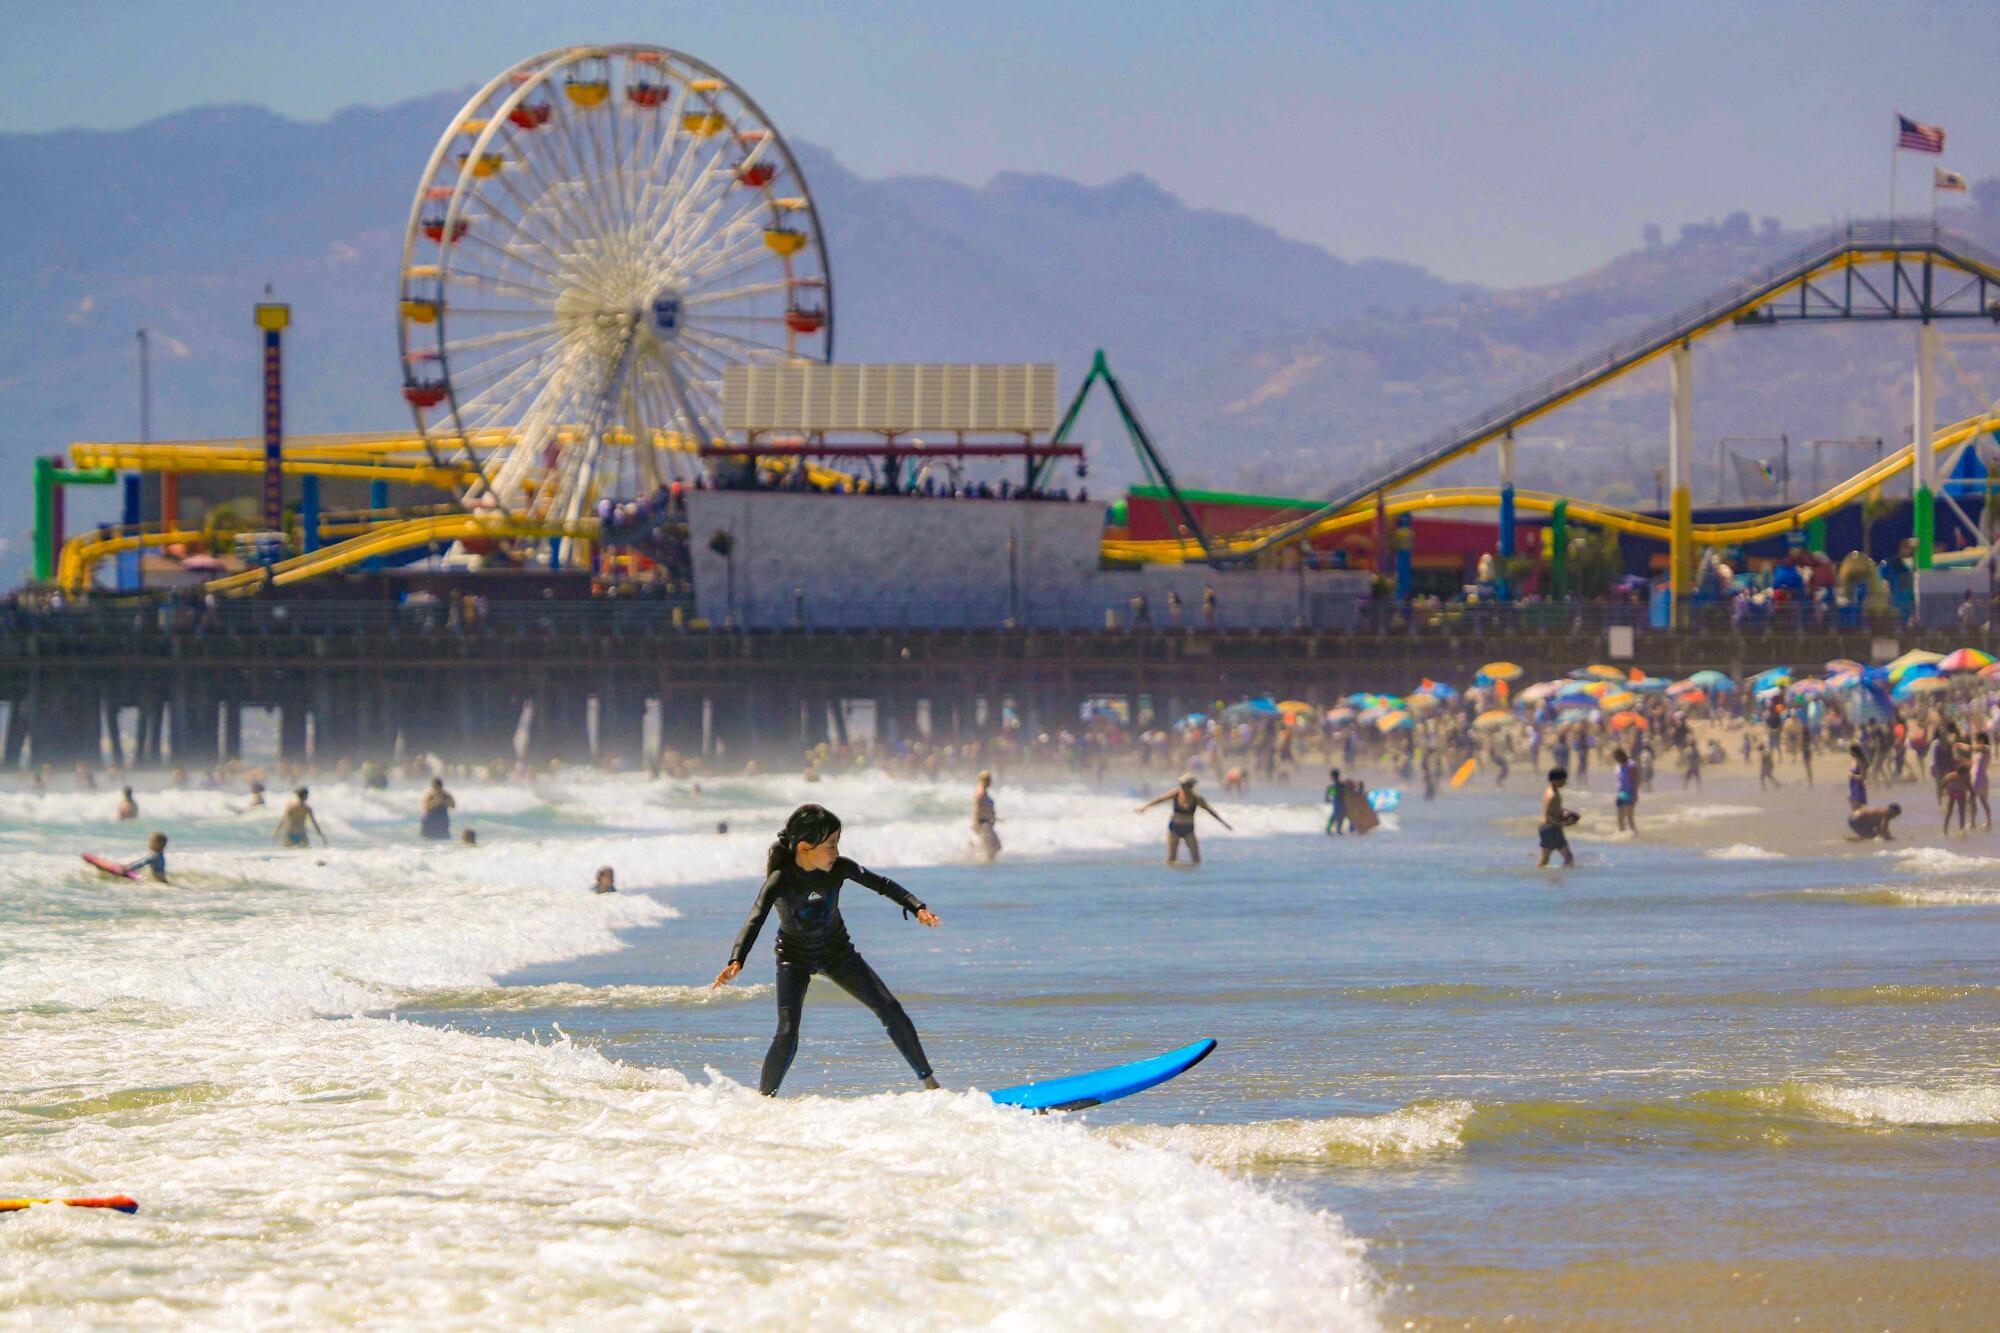 A young girl surfs in front of the Santa Monica Pier.